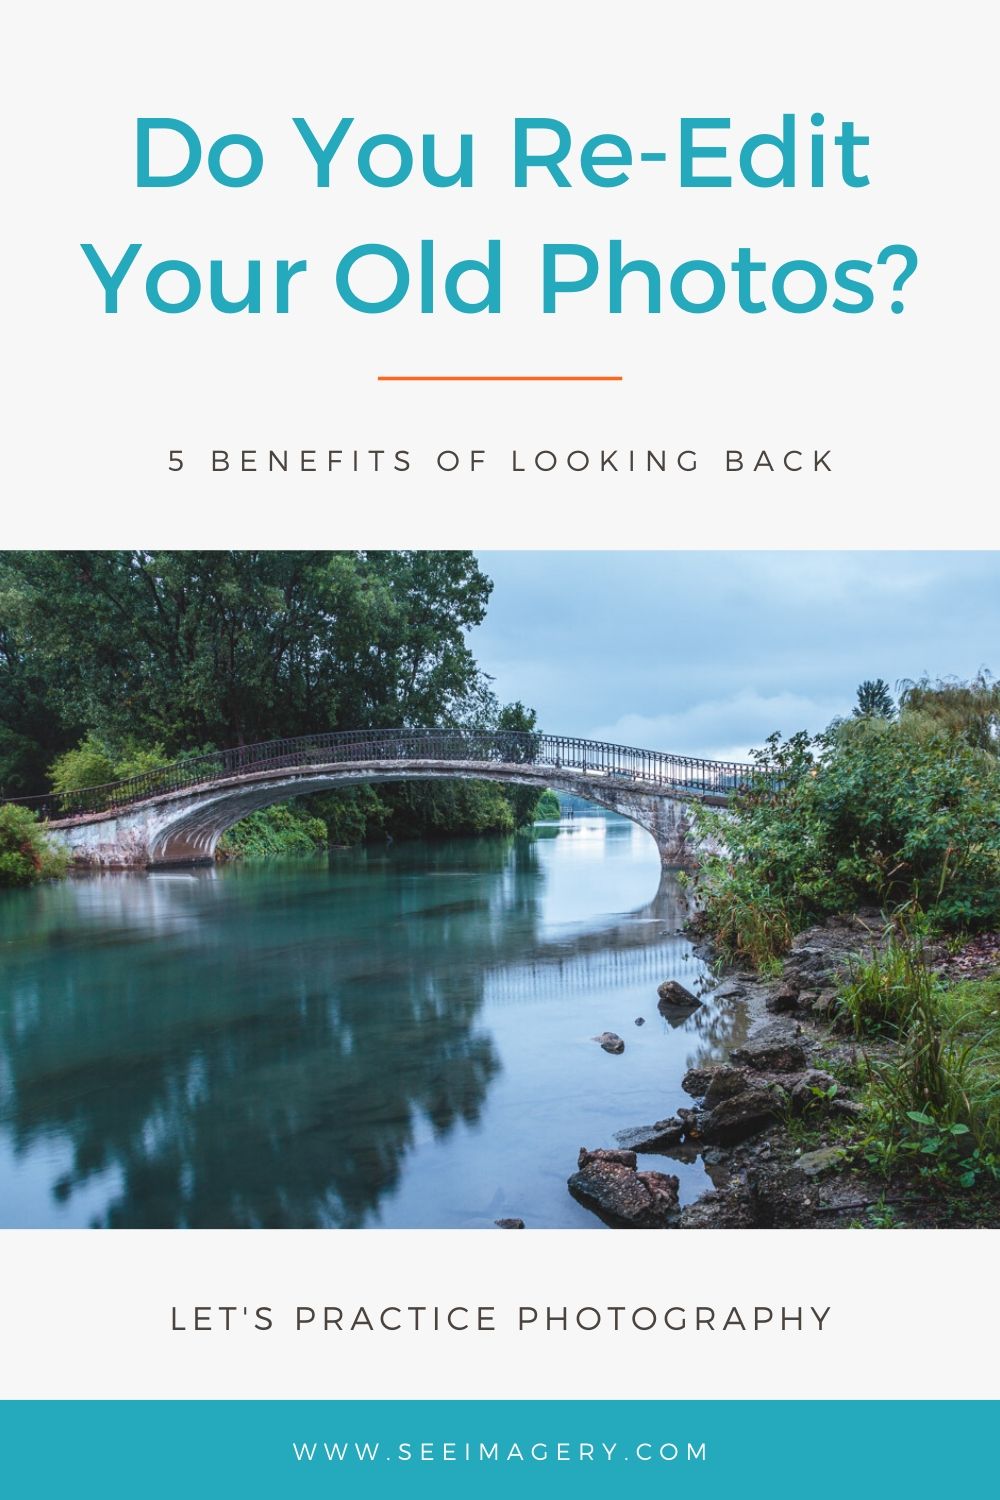 Do you re-edit your old photos?